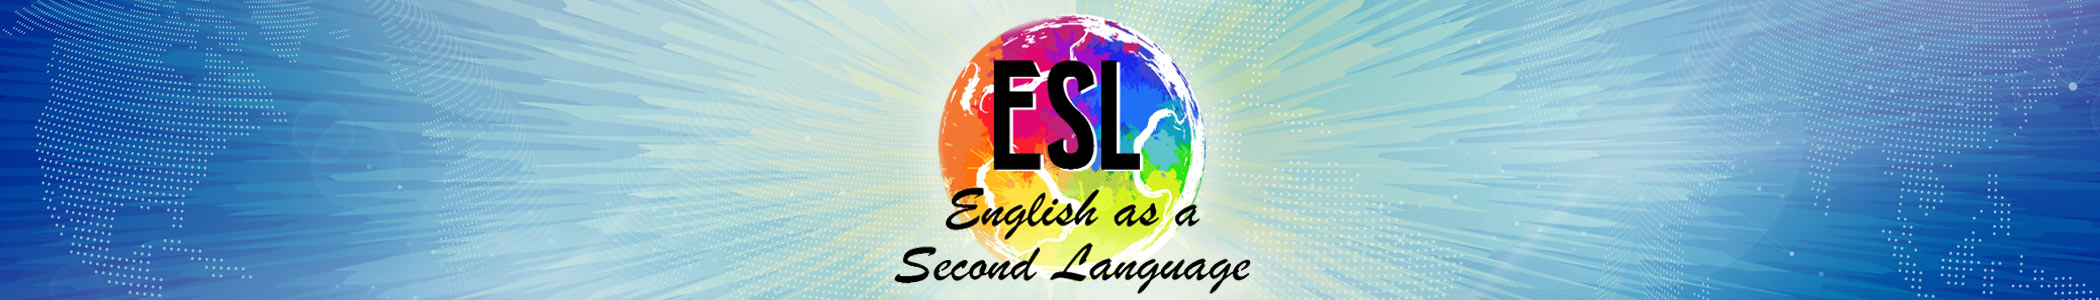 English as a Second Language at NNPS